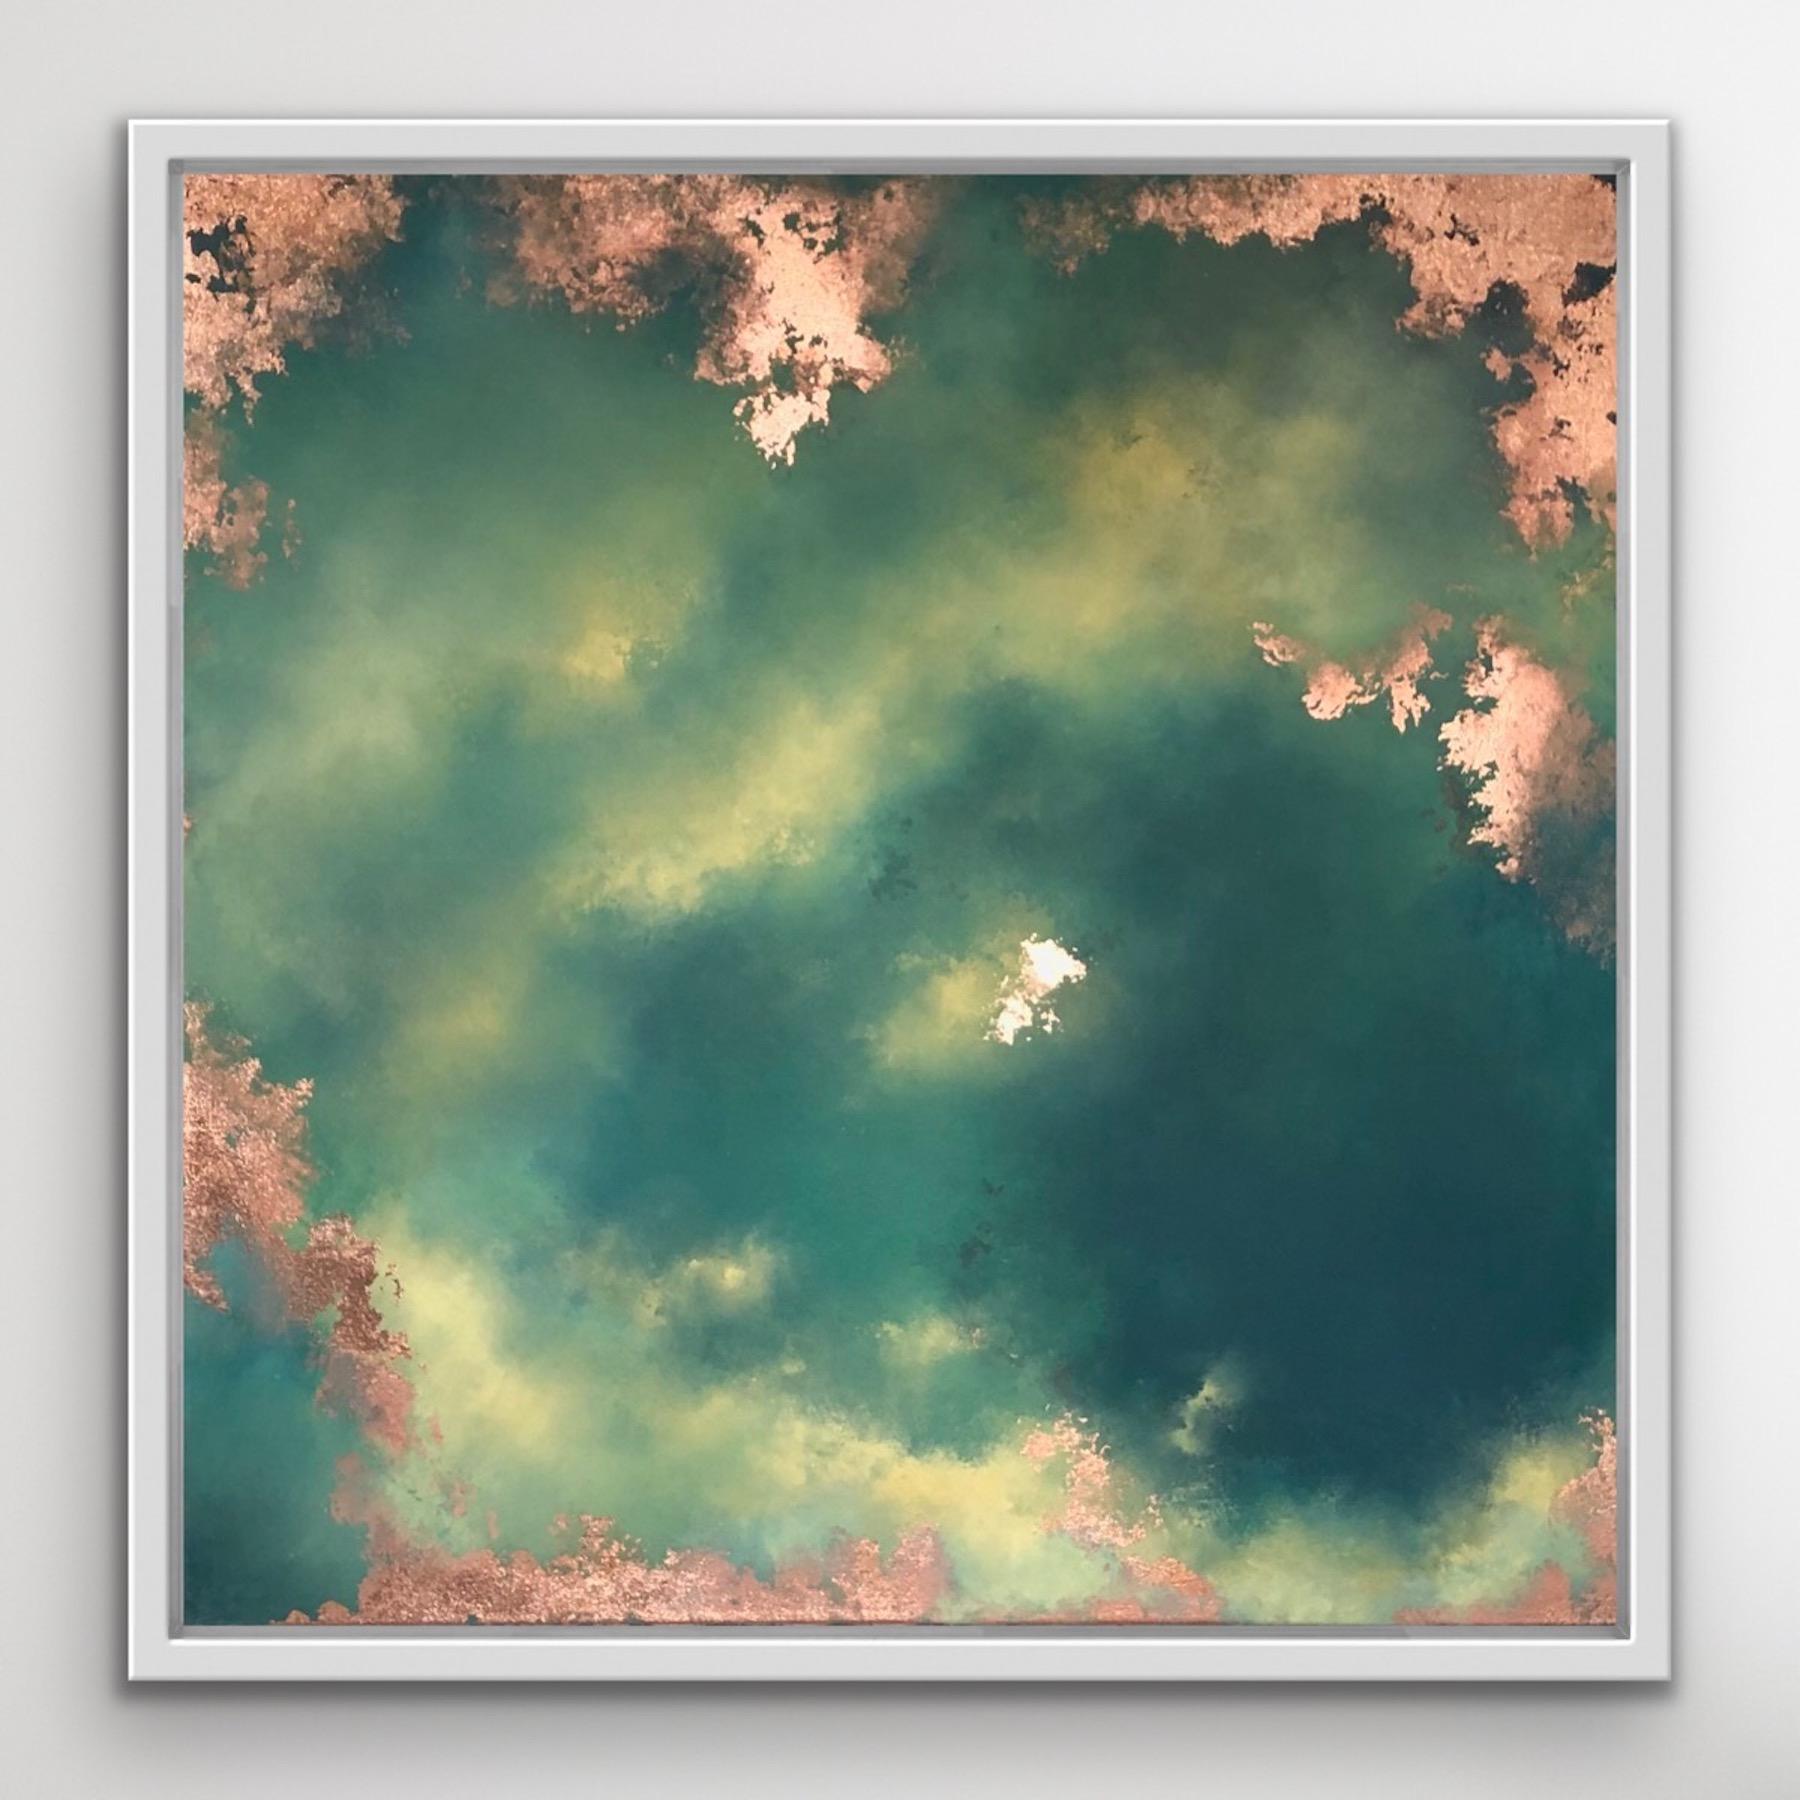 Once More [2021]
Please note that insitu images are purely an indication of how a piece may look.

Once More is an original mixed media skyscape painting by Charlotte Elizabeth. The metallic details around the edges add depth to the work.

Charlotte